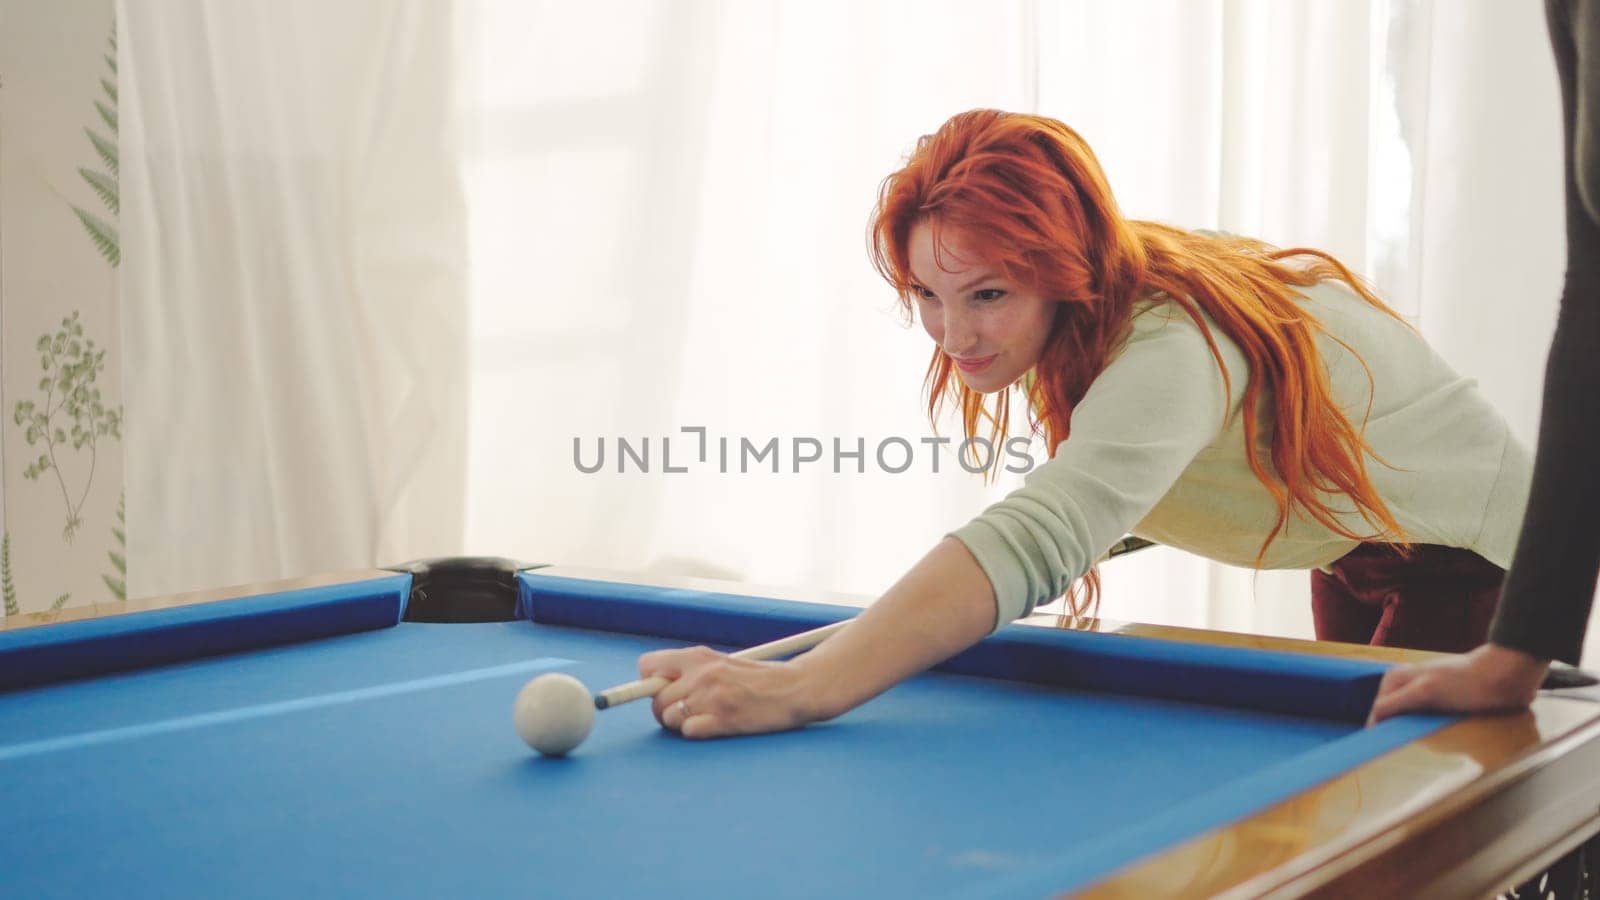 Concentrated woman hitting a pool ball playing with friends at home